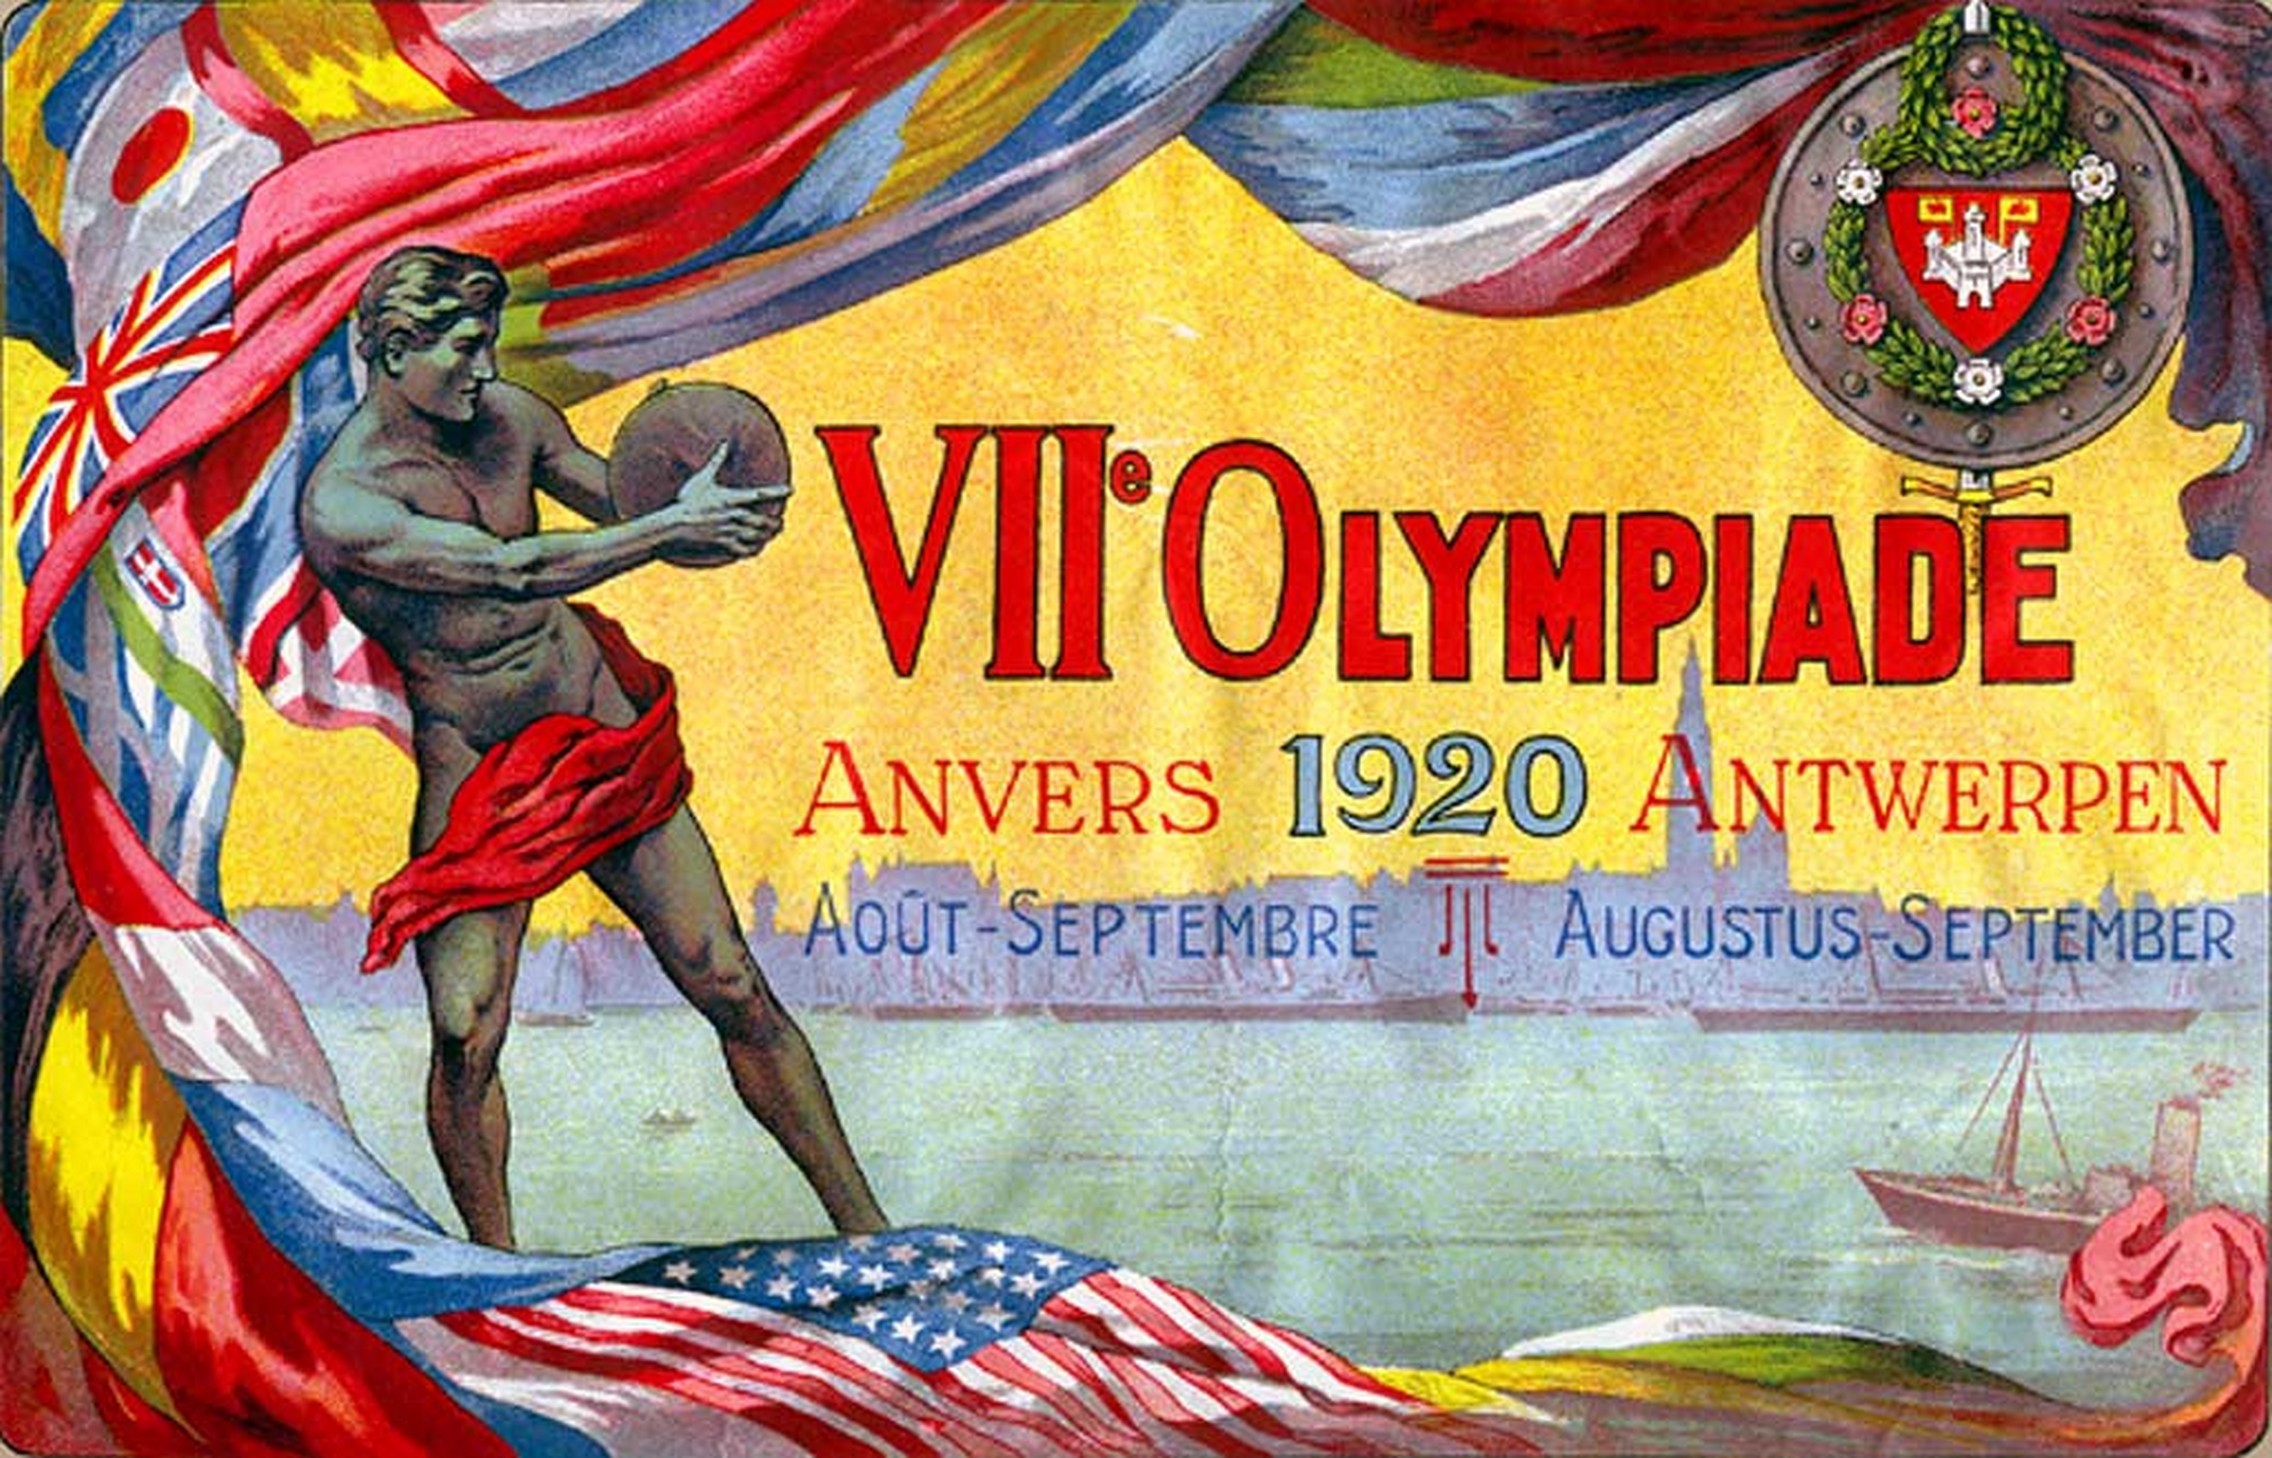 1920 Antwerp Summer Olympic Games Poster